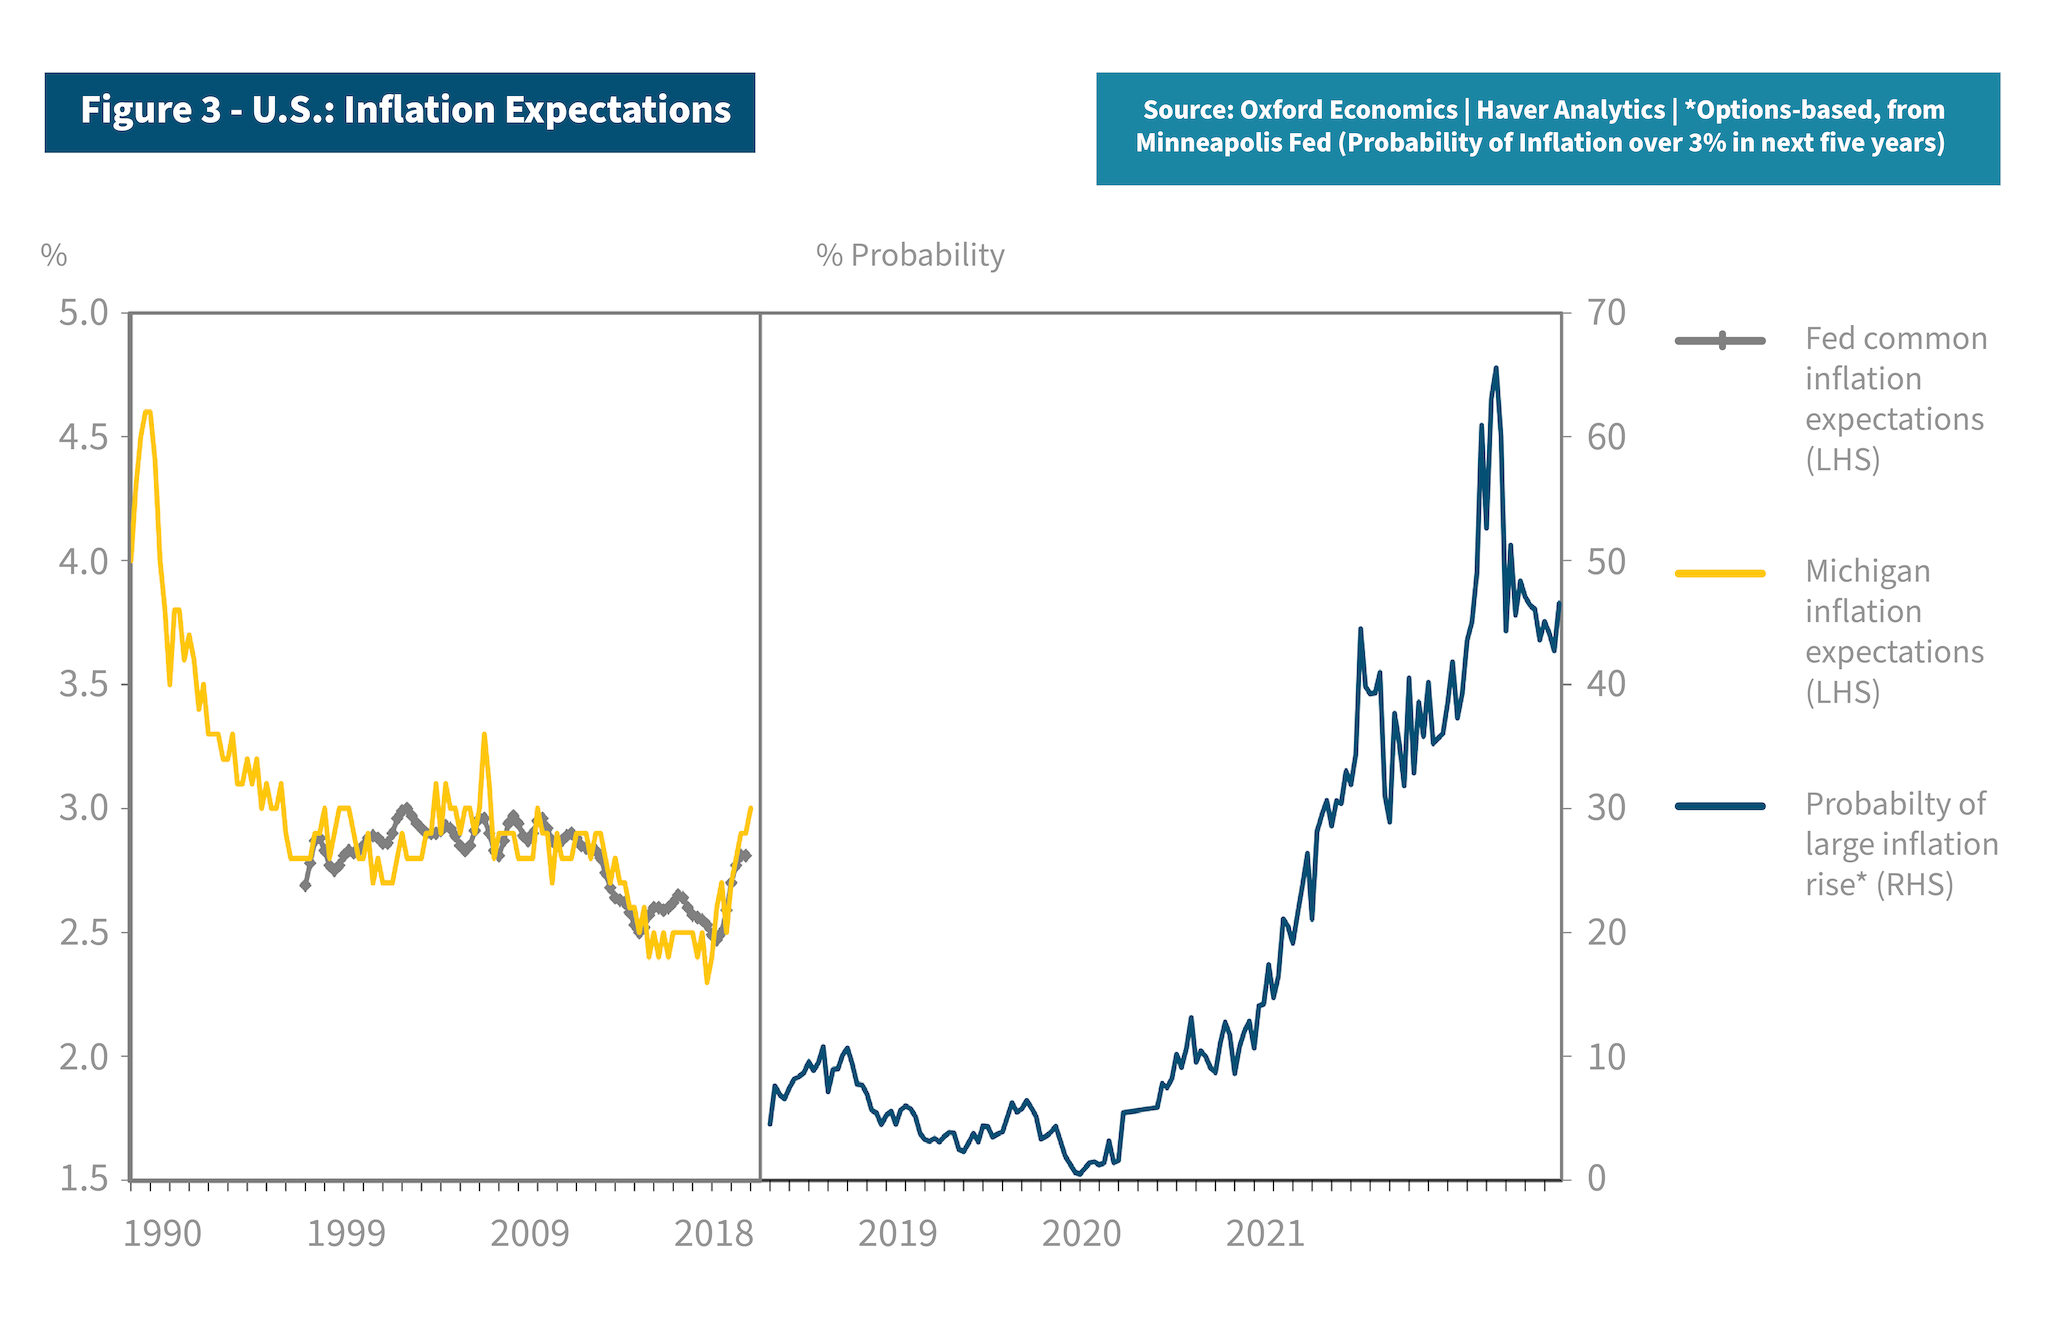 Graph shows inflation expectations for the U.S. with a high probability for extended inflation over the next few years.